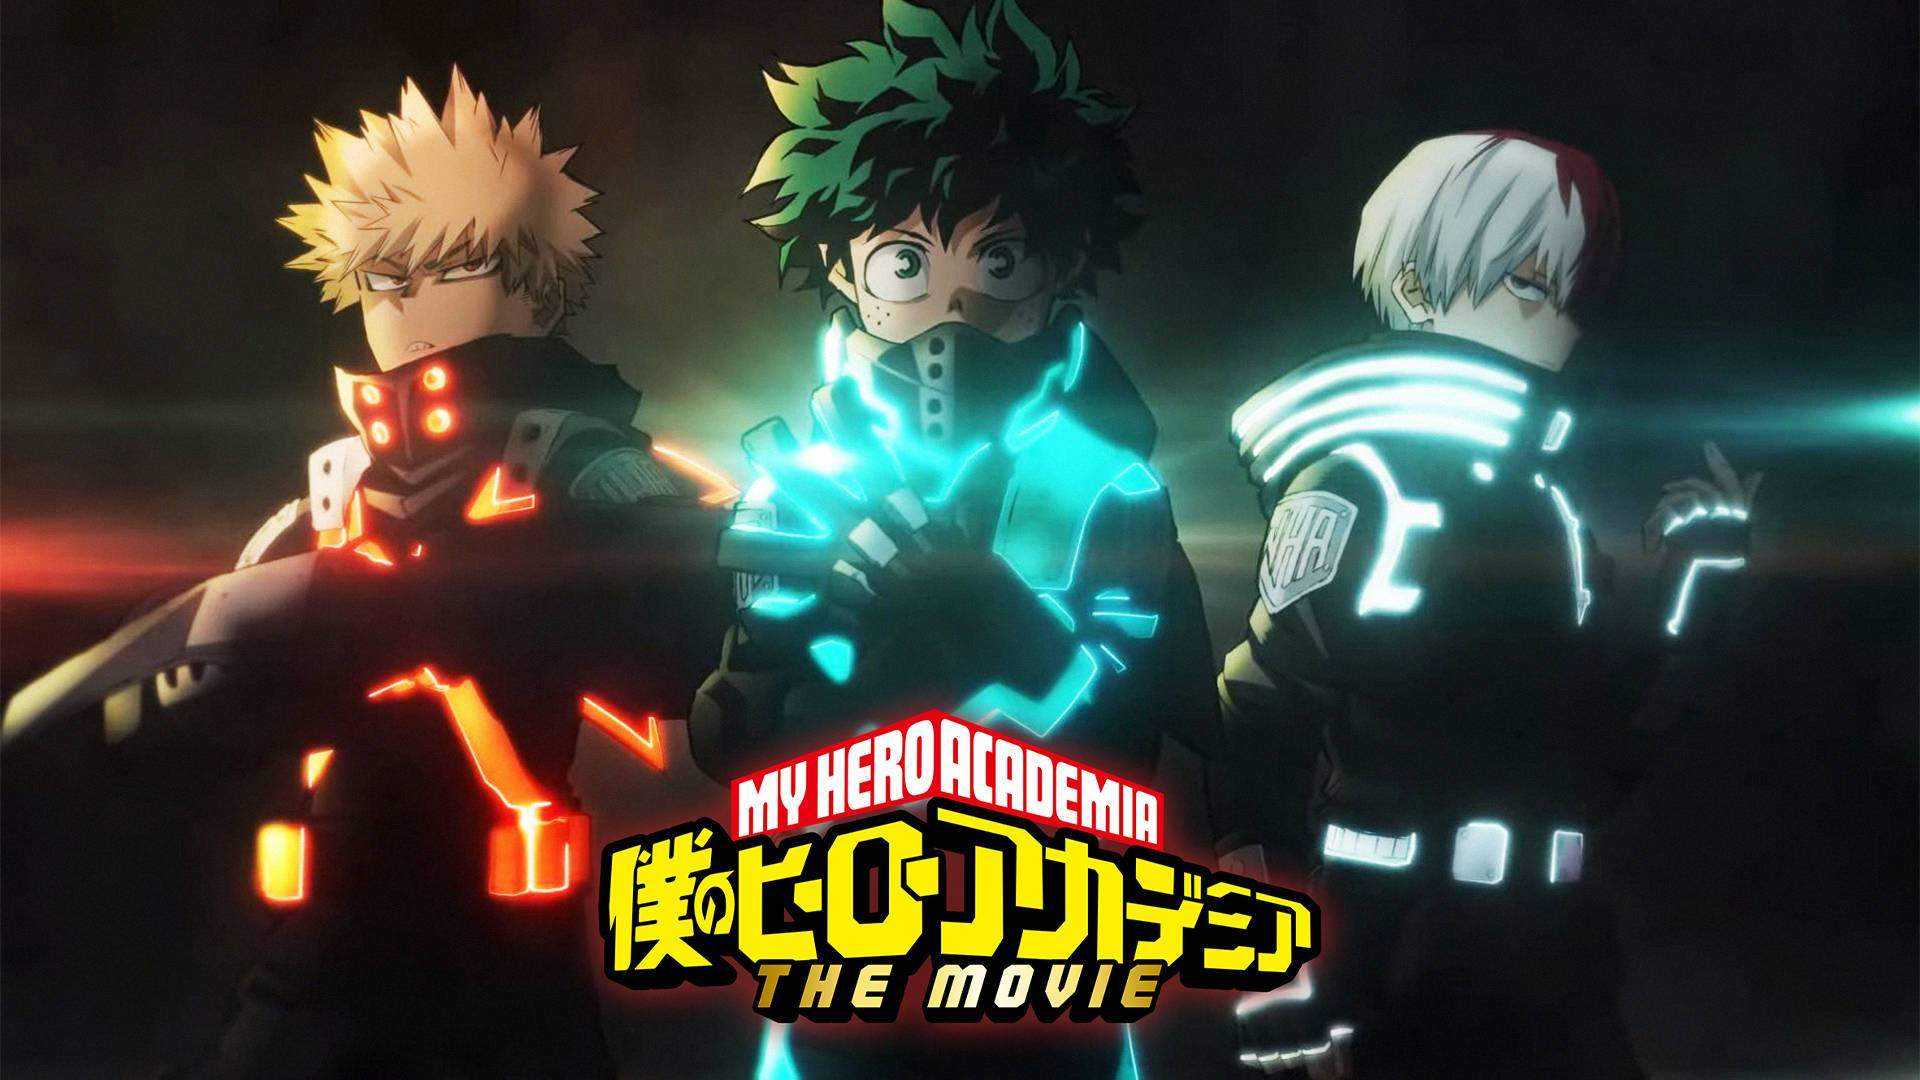 my-hero-academia-world-heroes-mission-ophg4qsse6vc3peo.jpg